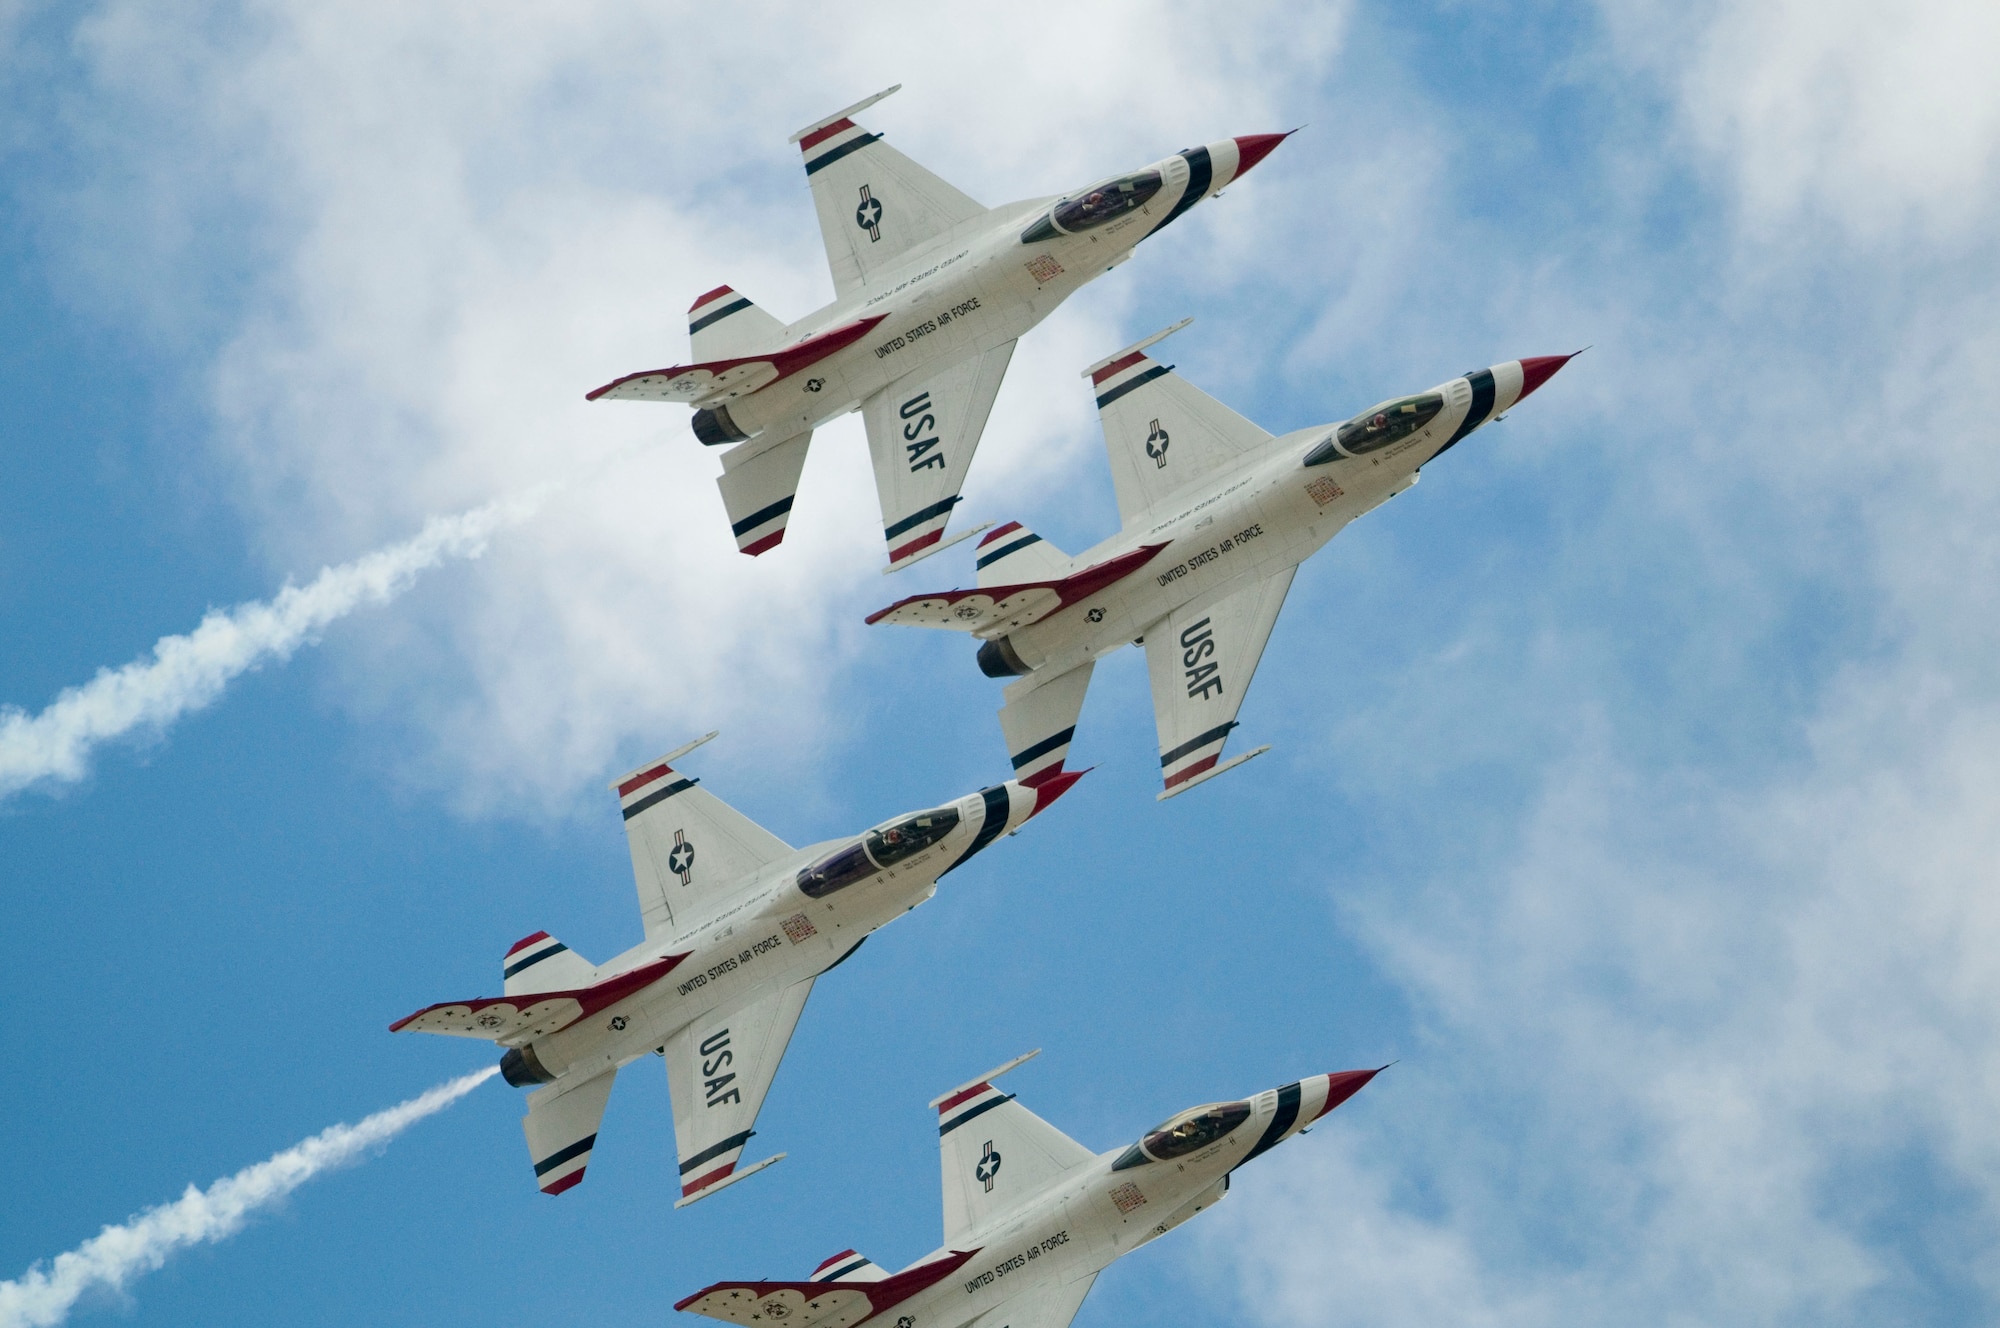 The U.S. Air Force Thunderbirds perform during the Thunder Over the Blue Ridge Open House and Air Show. The 167th Airlift Wing, West Virginia Air National Guard unit in Martinsburg, WV held an open house in conjuction with the Thunder Over the Blue Ridge Air Show on September 4 and 5, 2010. The U.S. Air Force Thunderbirds and the U.S. Army Golden Knights headlined the show. (U.S. Air Force photo by MSgt Sean Brennan)